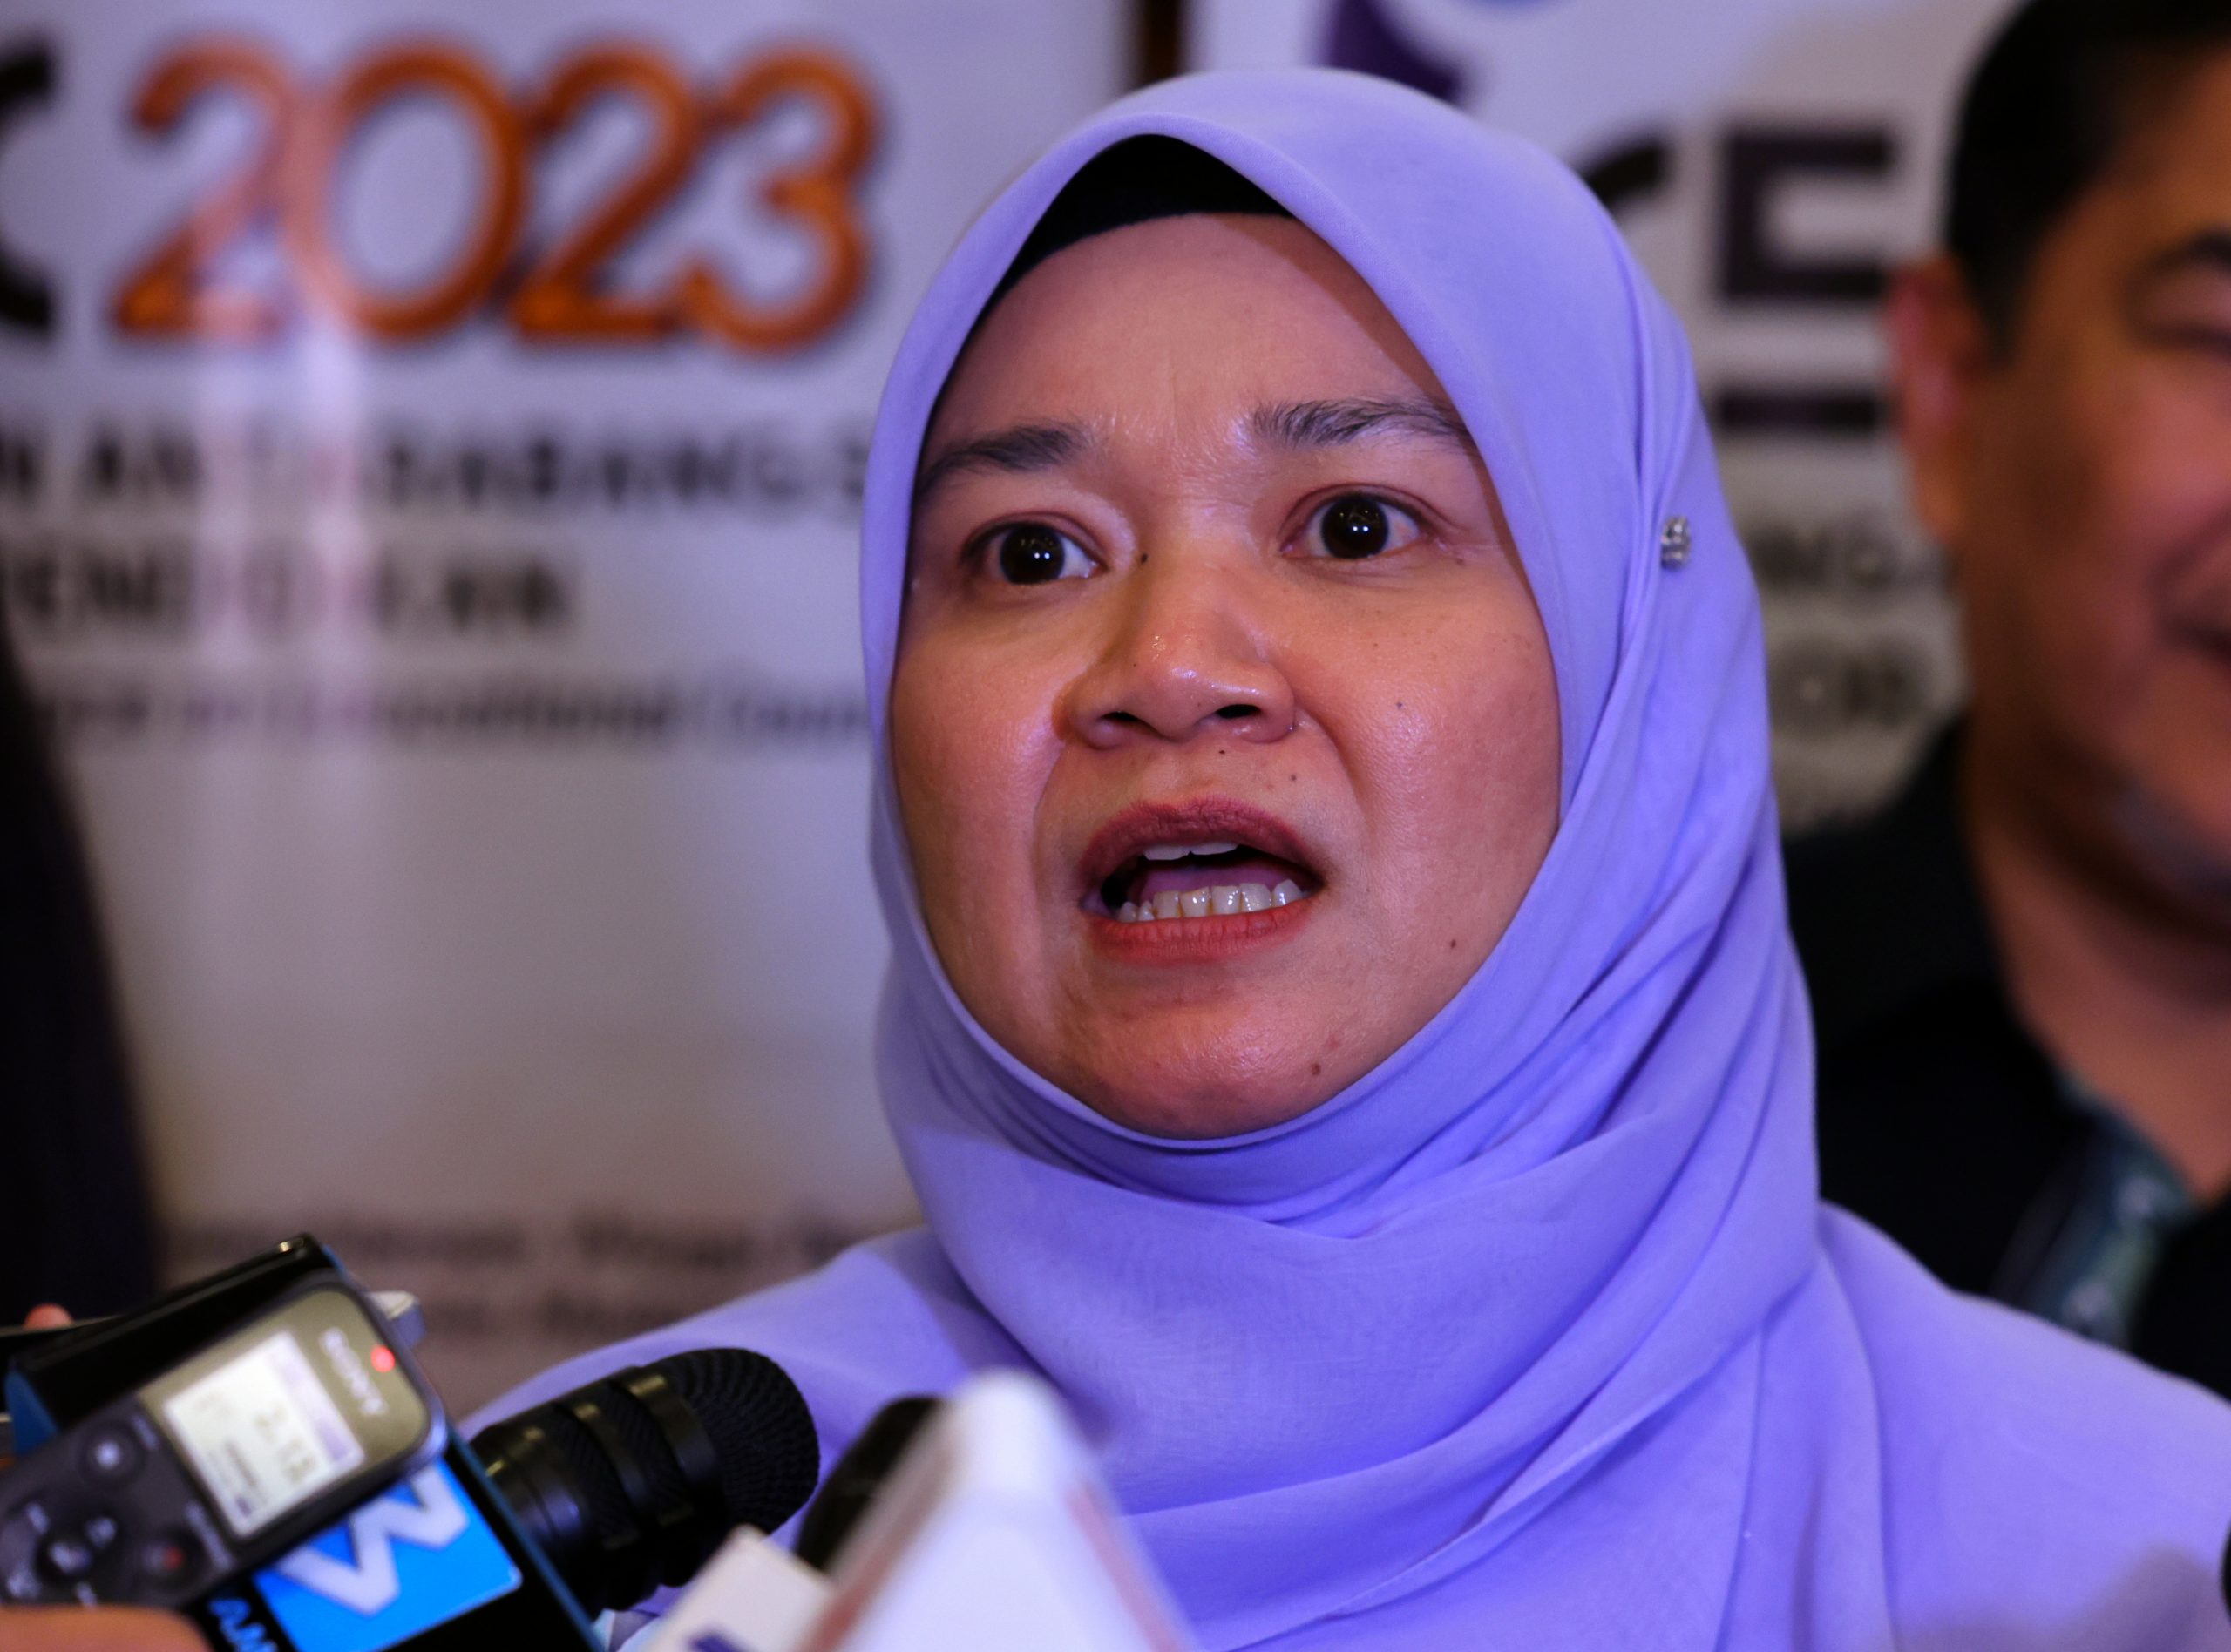 MoE expands preschool classes every year to avoid dropouts, says Fadhlina